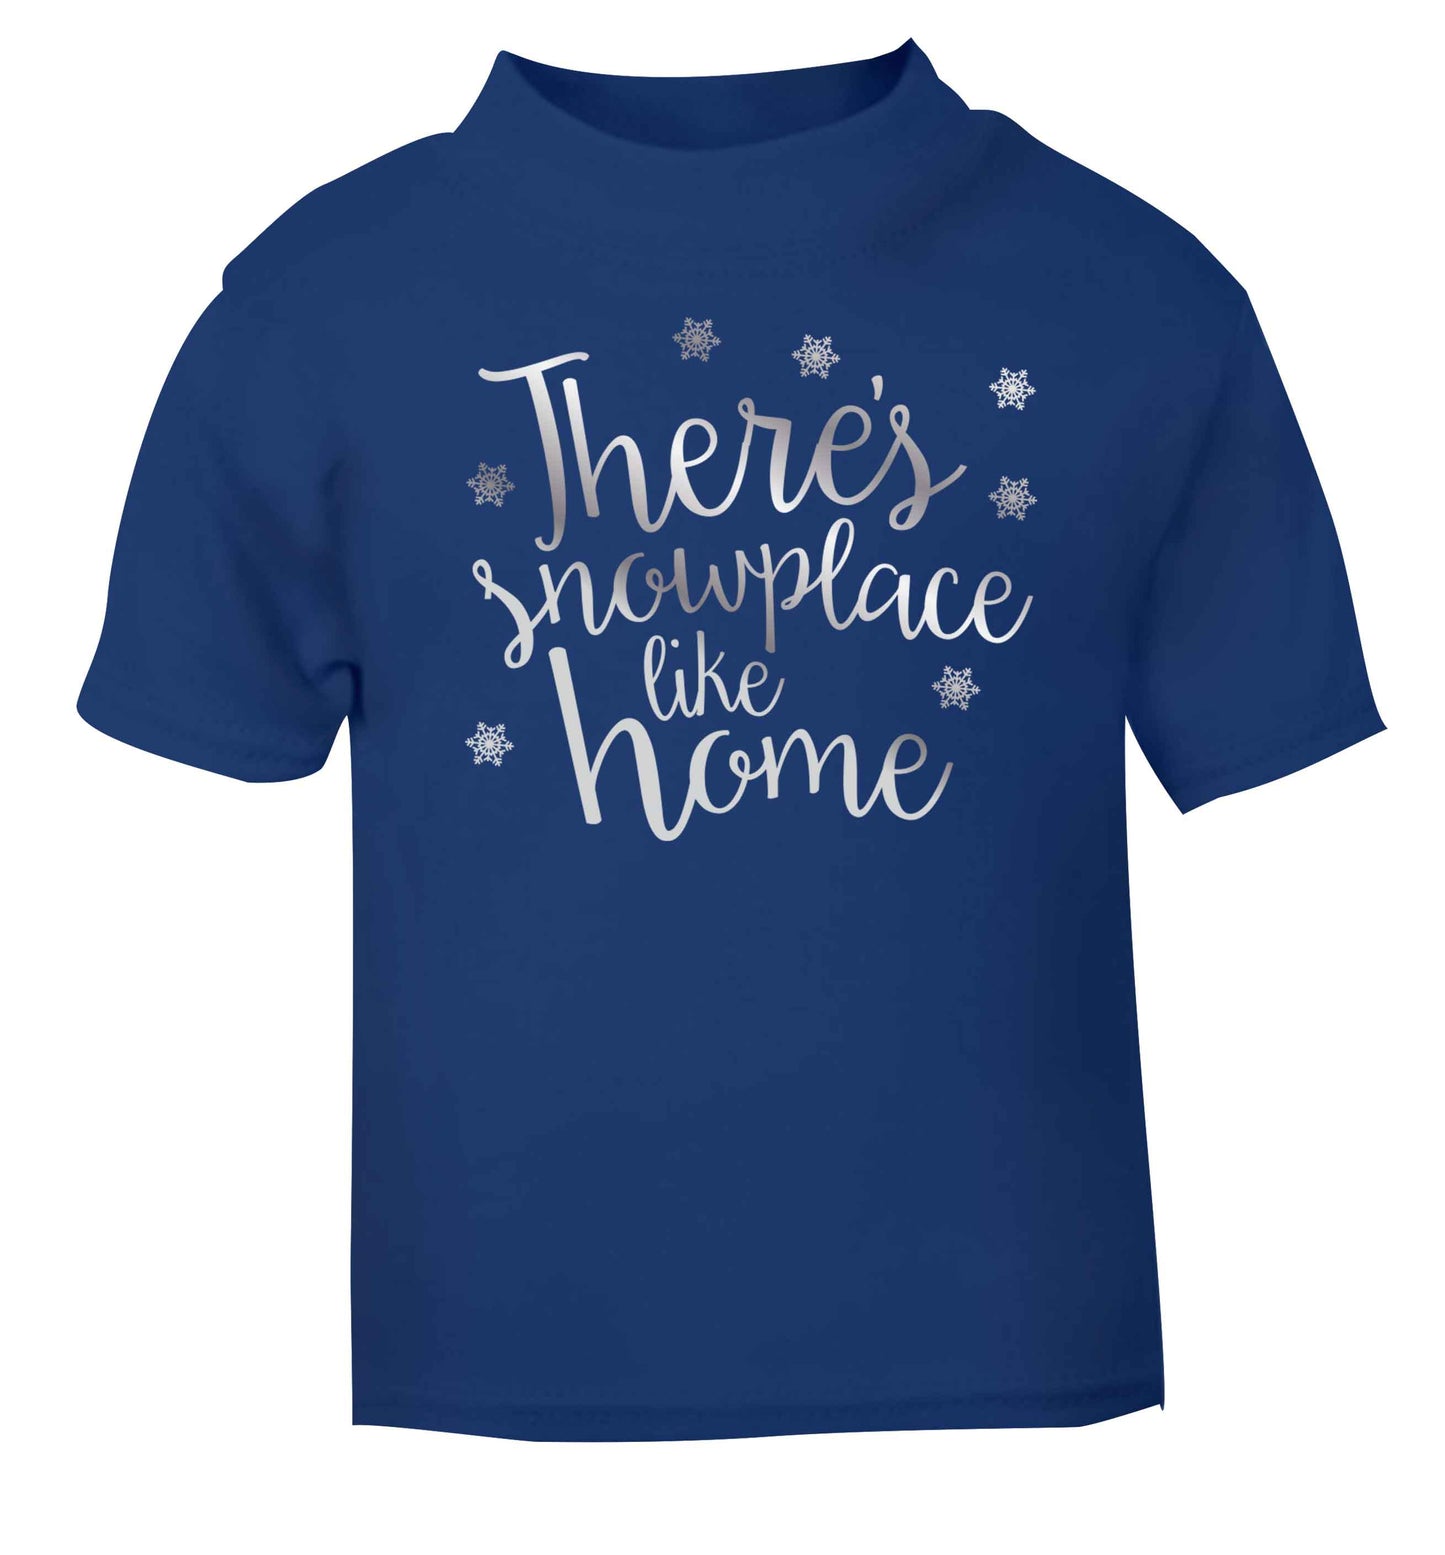 There's snowplace like home - metallic silver blue baby toddler Tshirt 2 Years